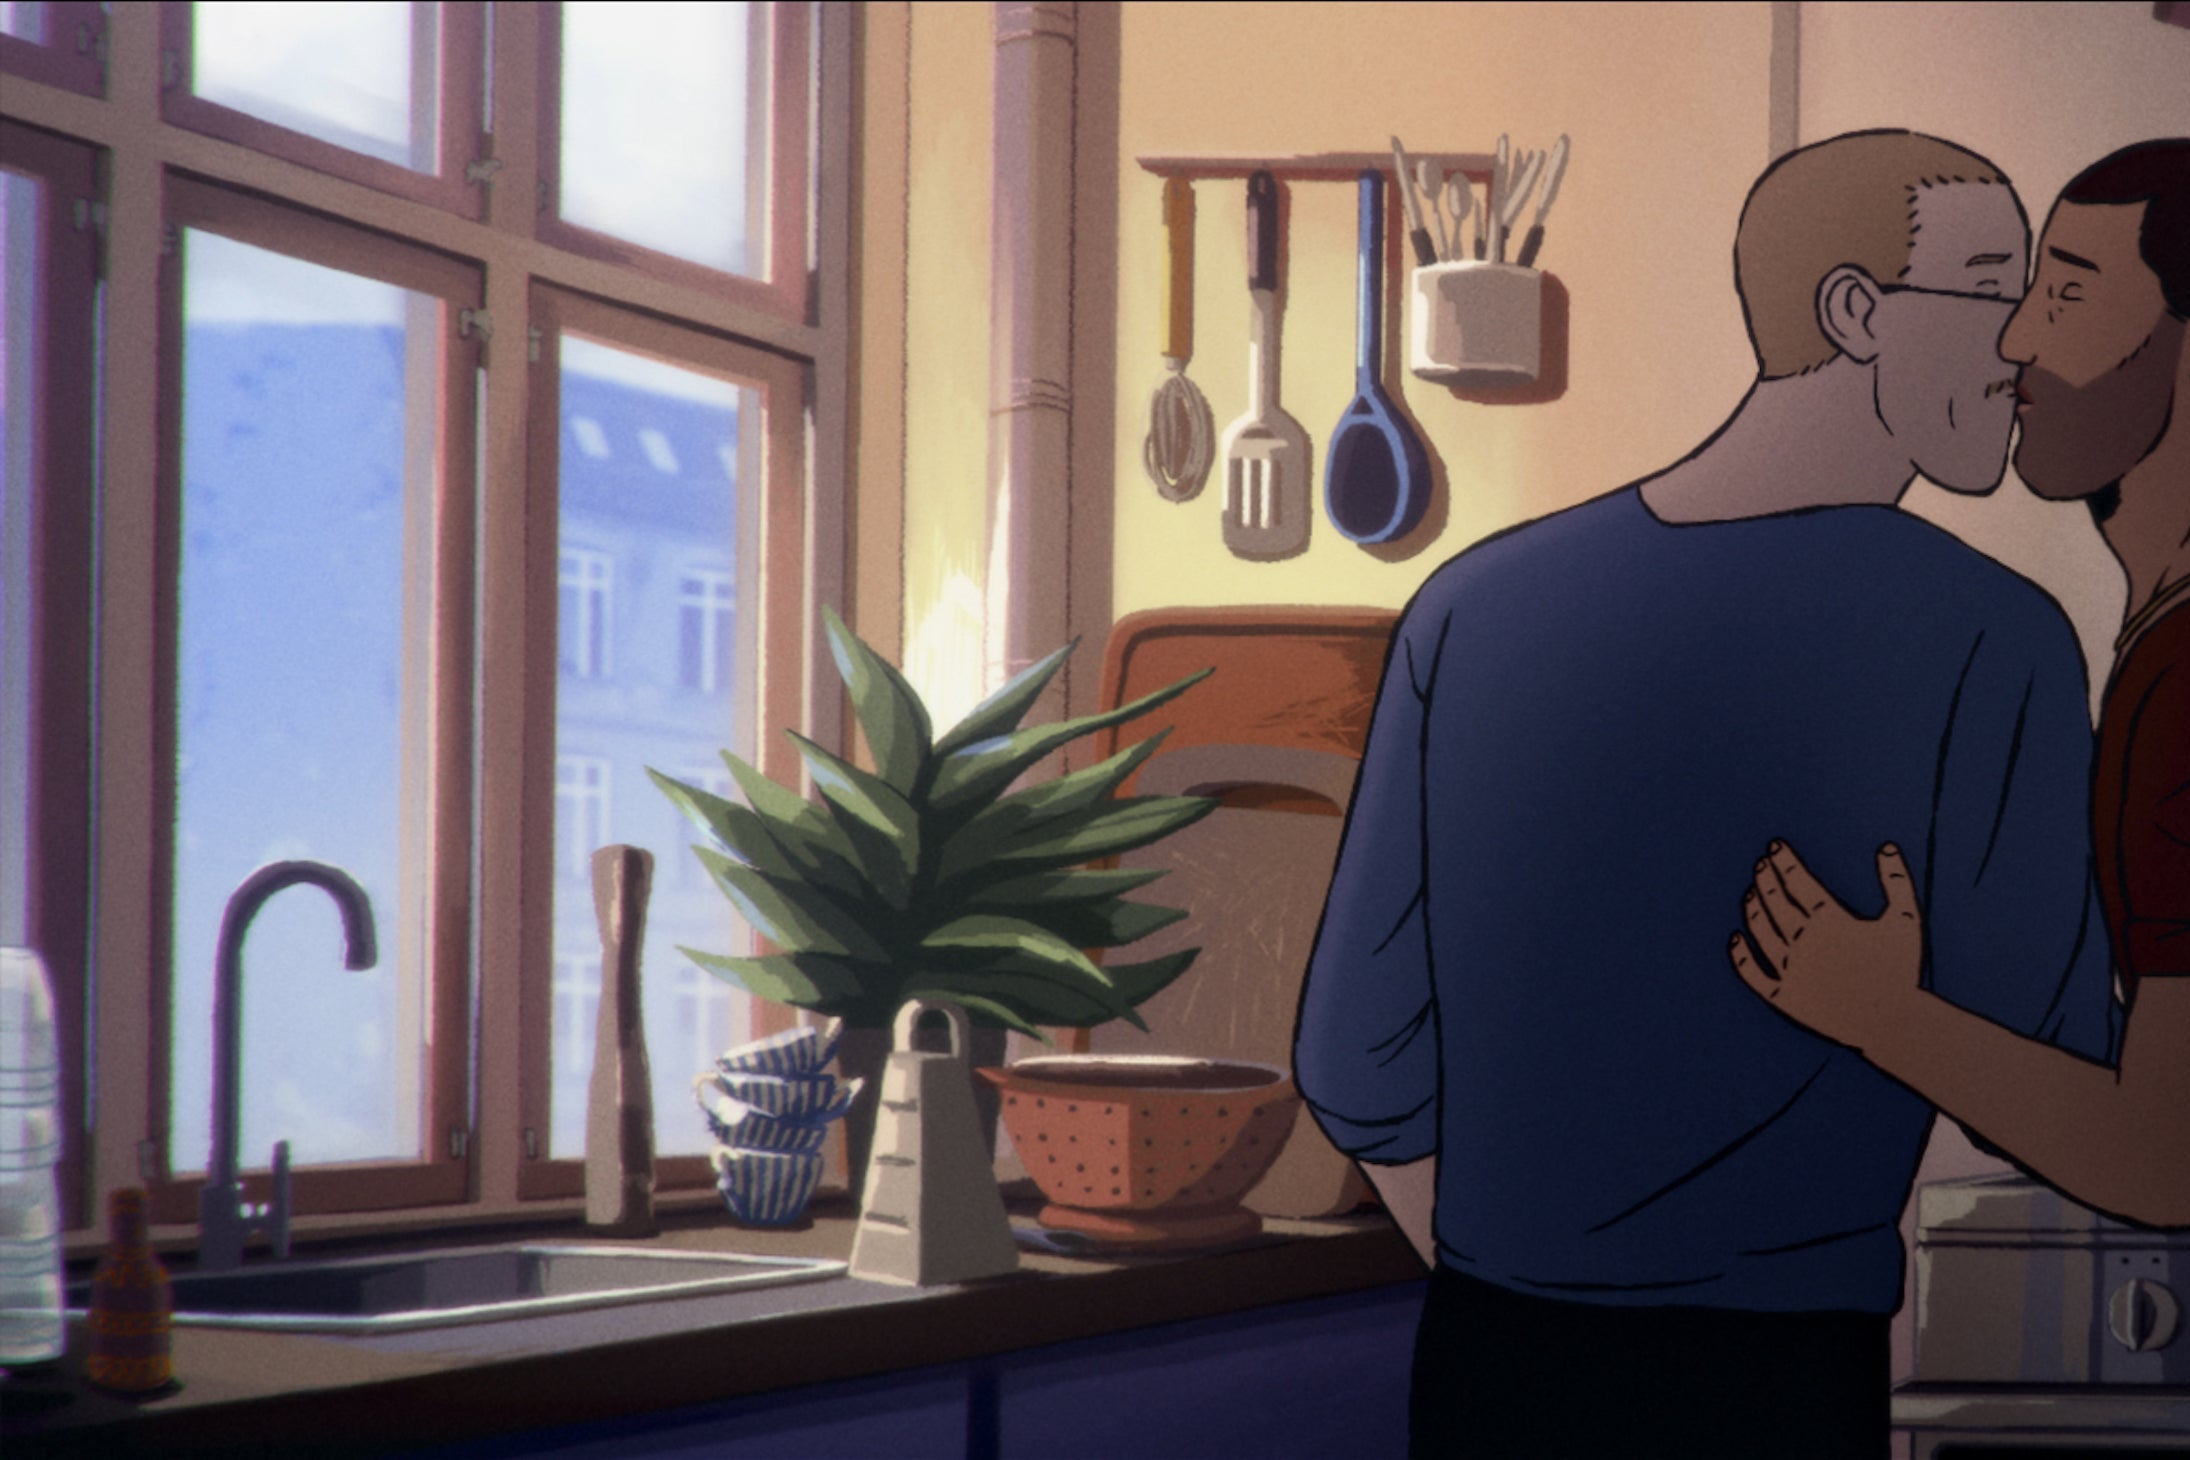 A neatly drawn kitchen scene showing two men, one lighter skinned and blond and the other darker skinned and darker haired, both with short hair, kissing